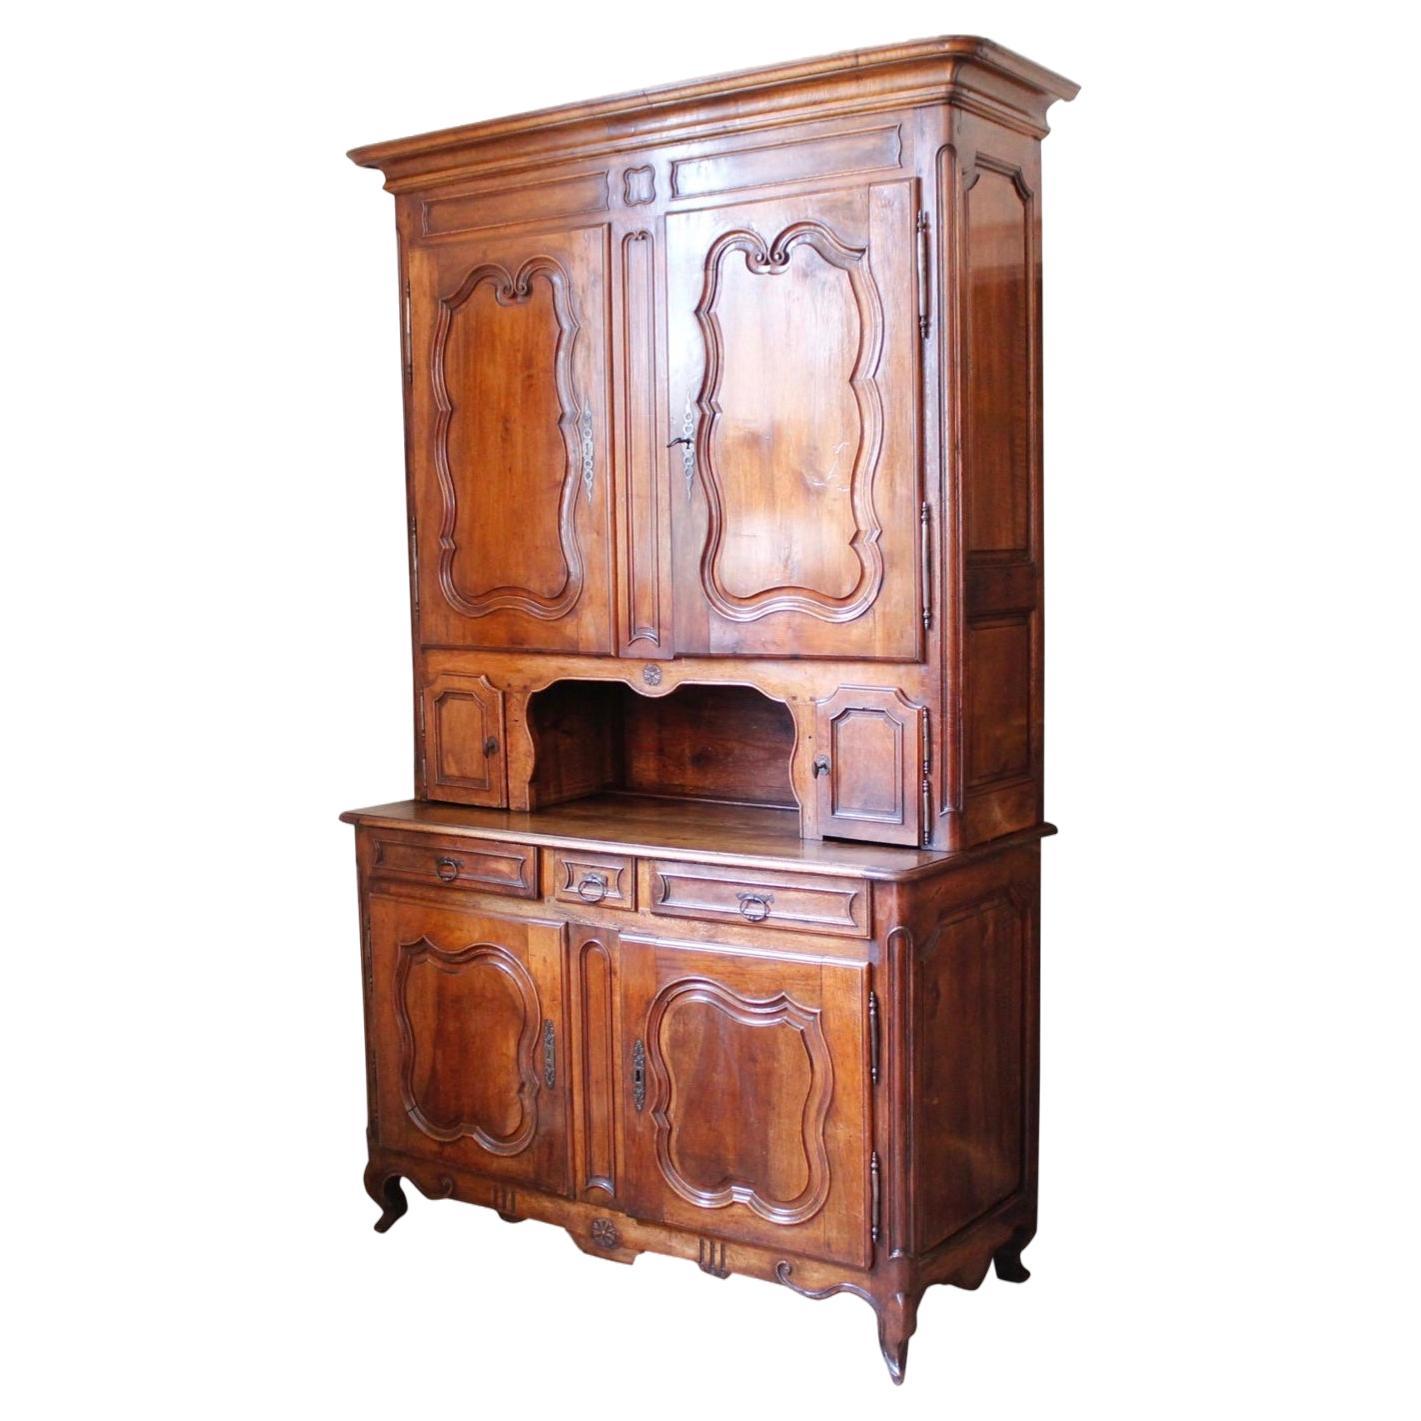 French Provincial Walnut Buffet À Deux Corps, Early 19th Century For Sale